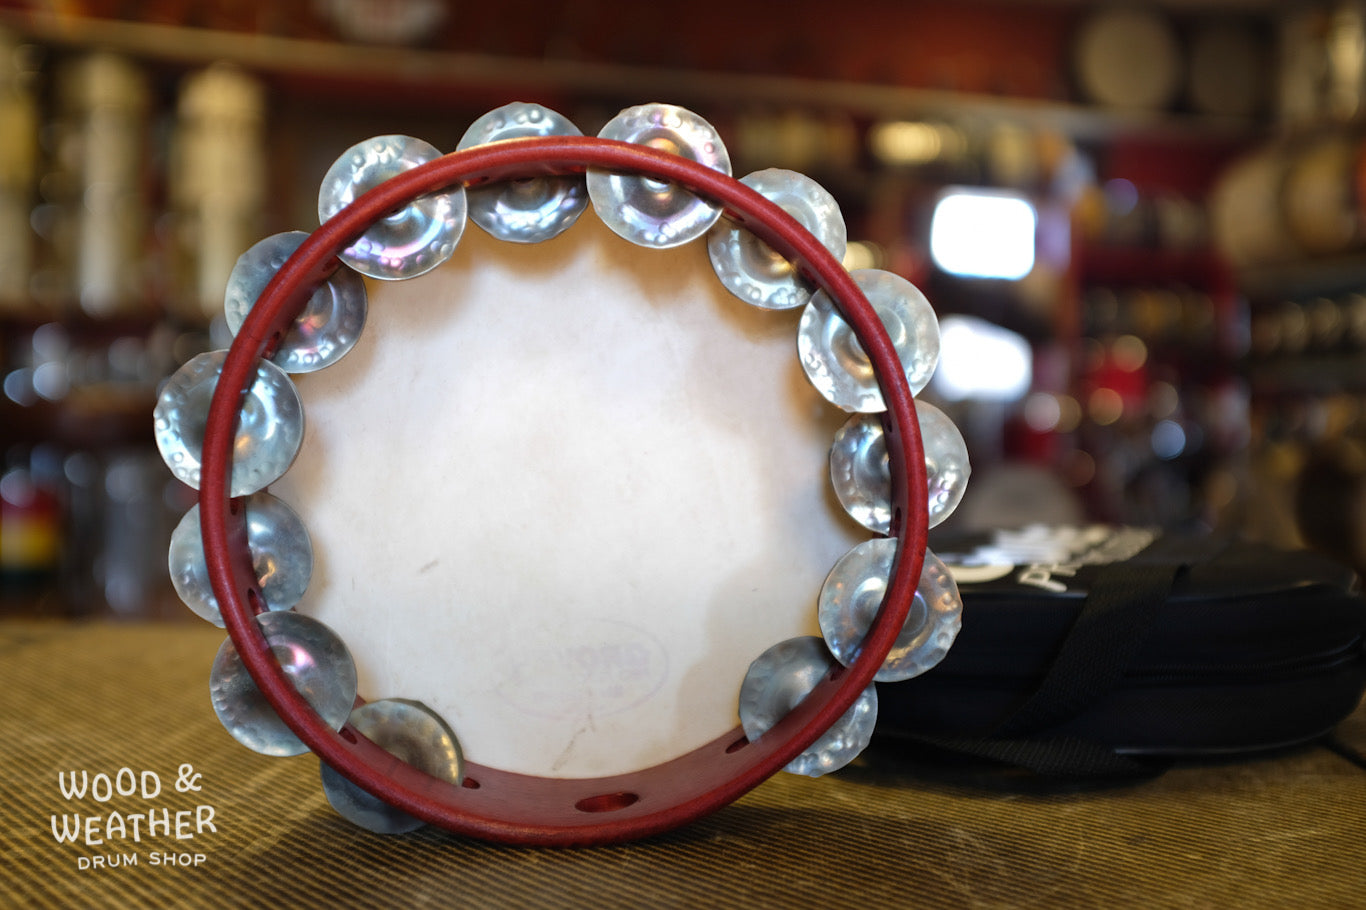 Grover 8" Red Tambourine Double Row Nickle Jingles - USED